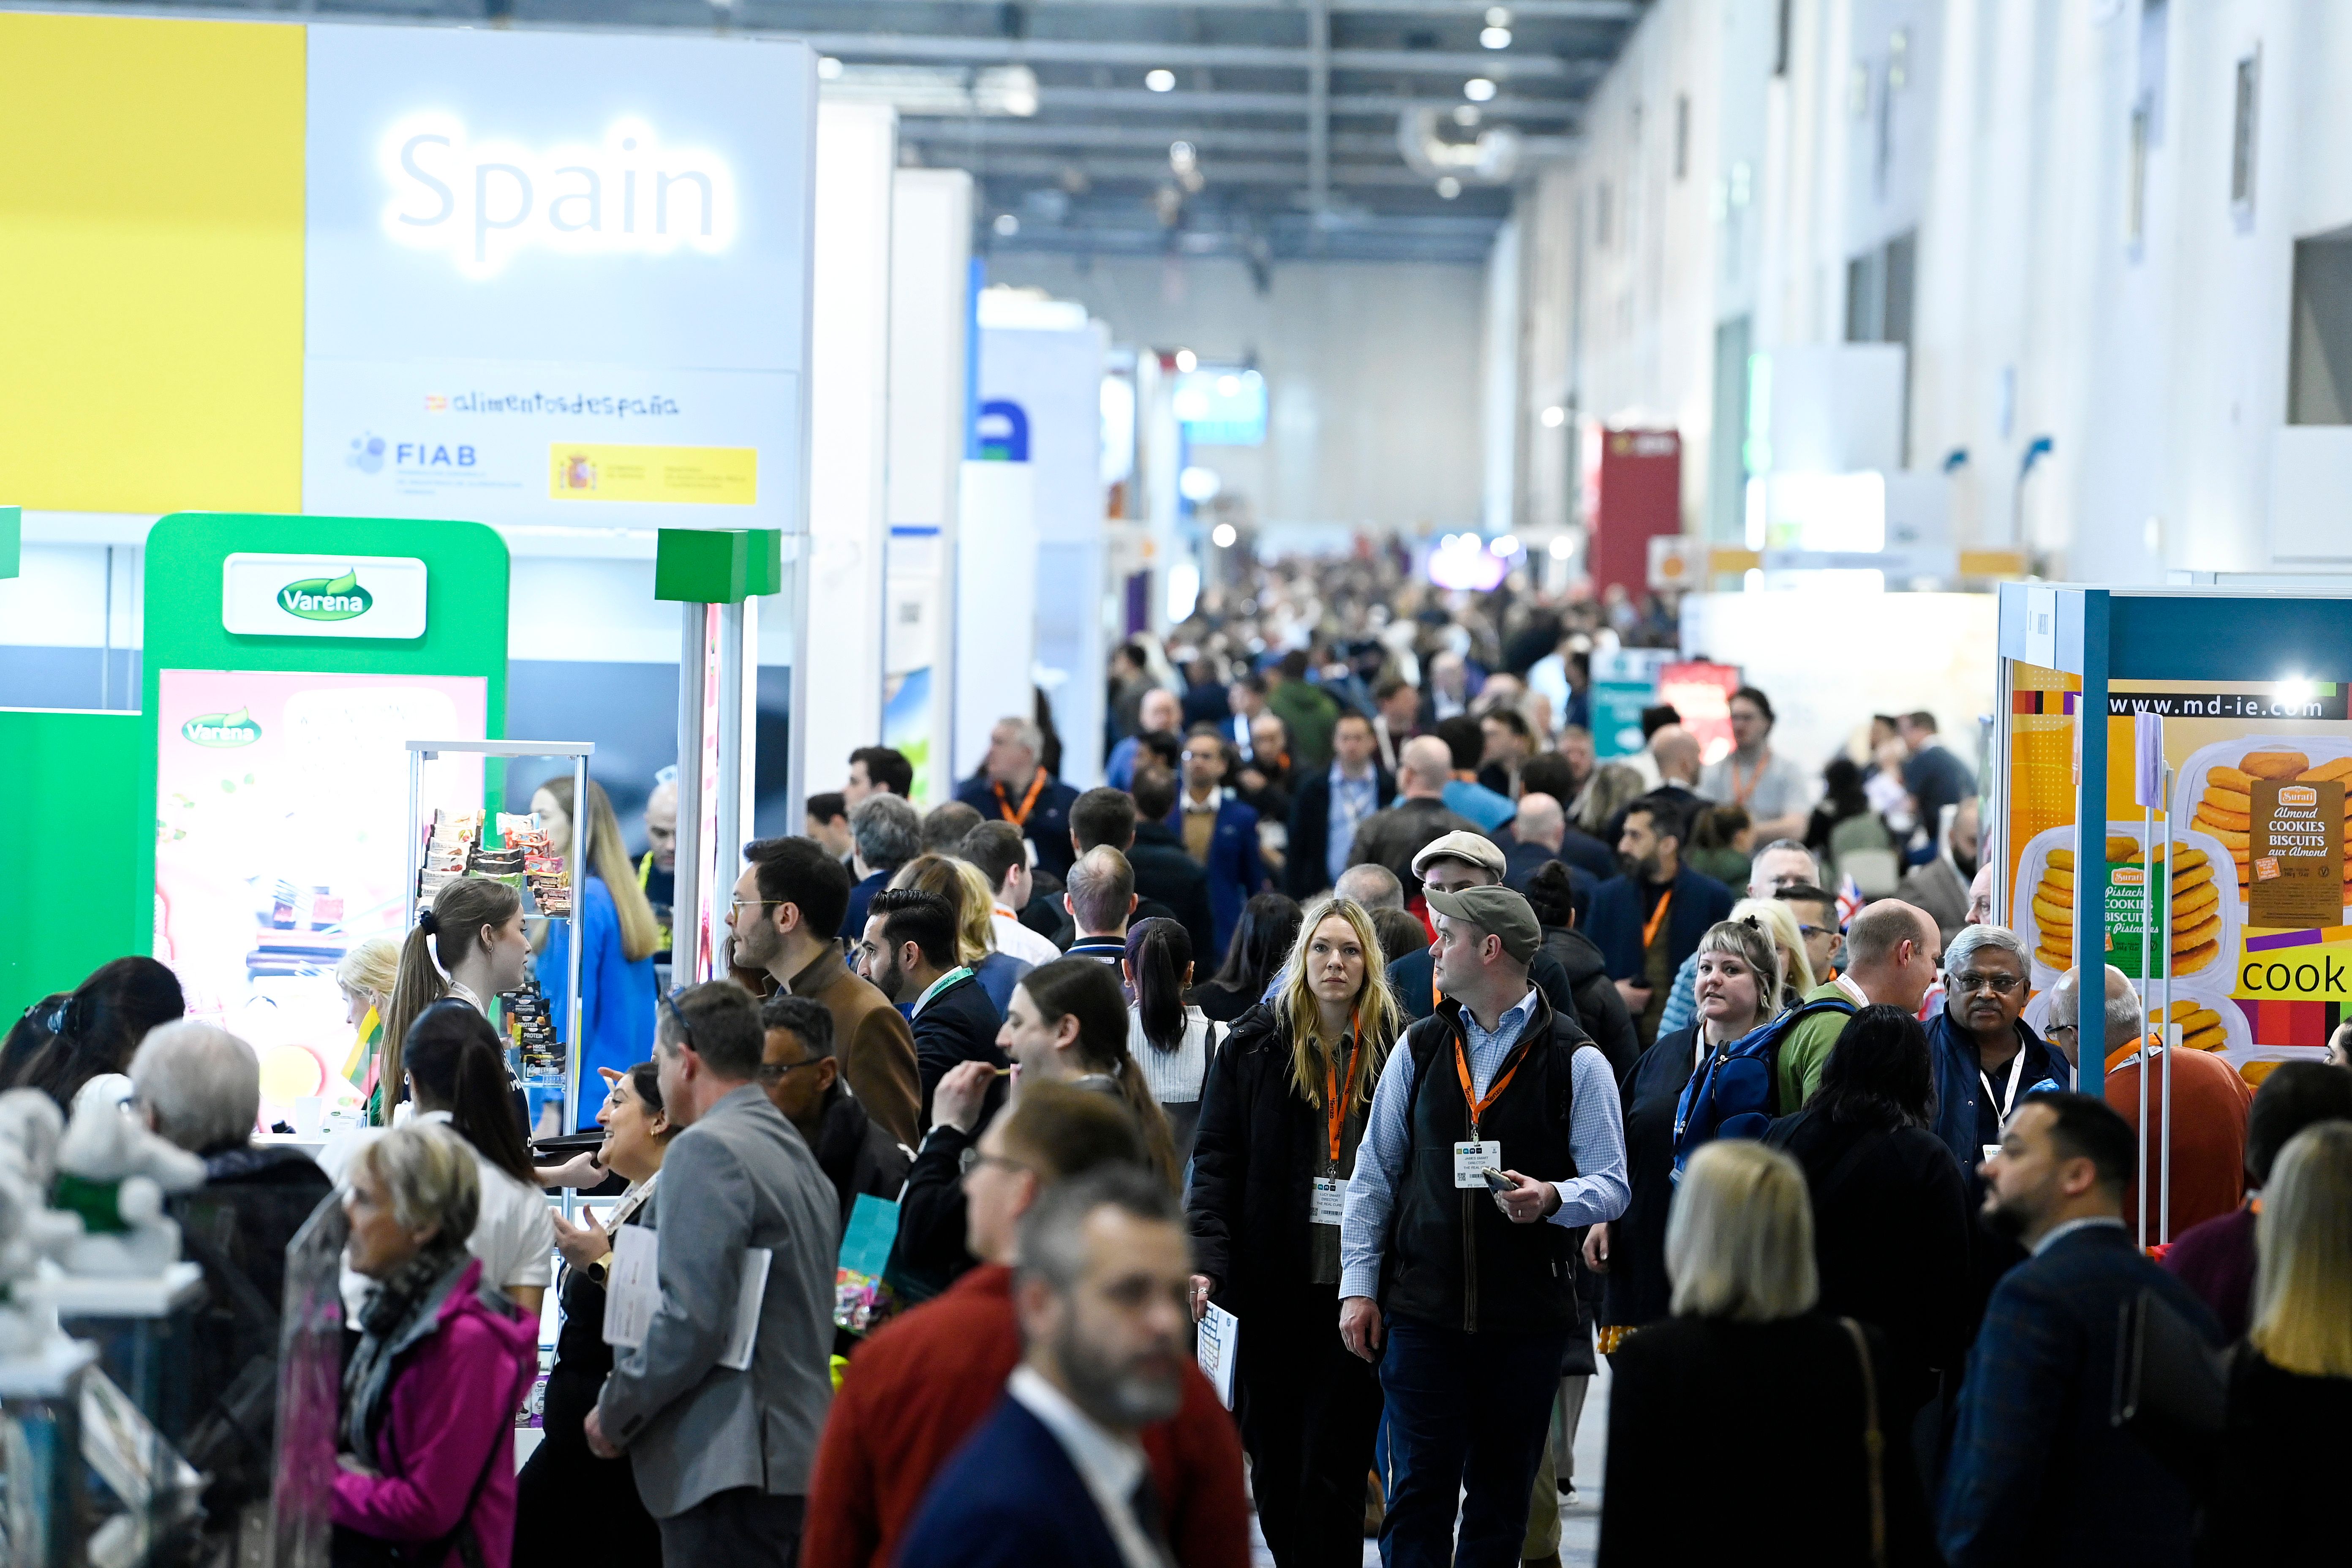 Our action-packed show floor, and buying audience with a collective spend of £29.1bn, makes IFE an event you don't want to miss